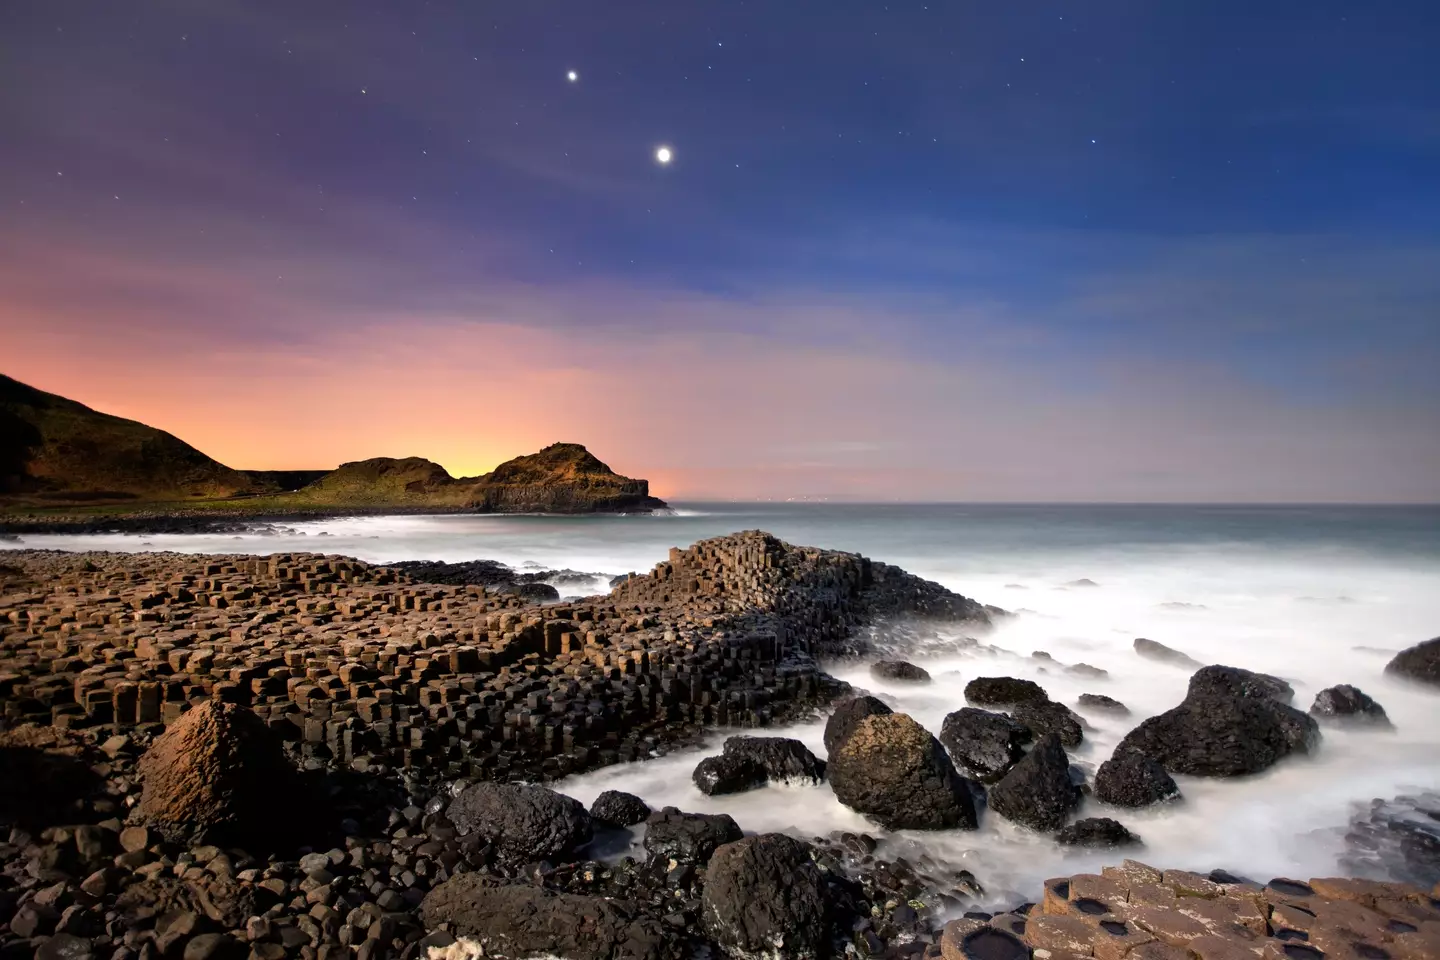 Jupiter and Venus visible in the sky from the Giants Causeway.